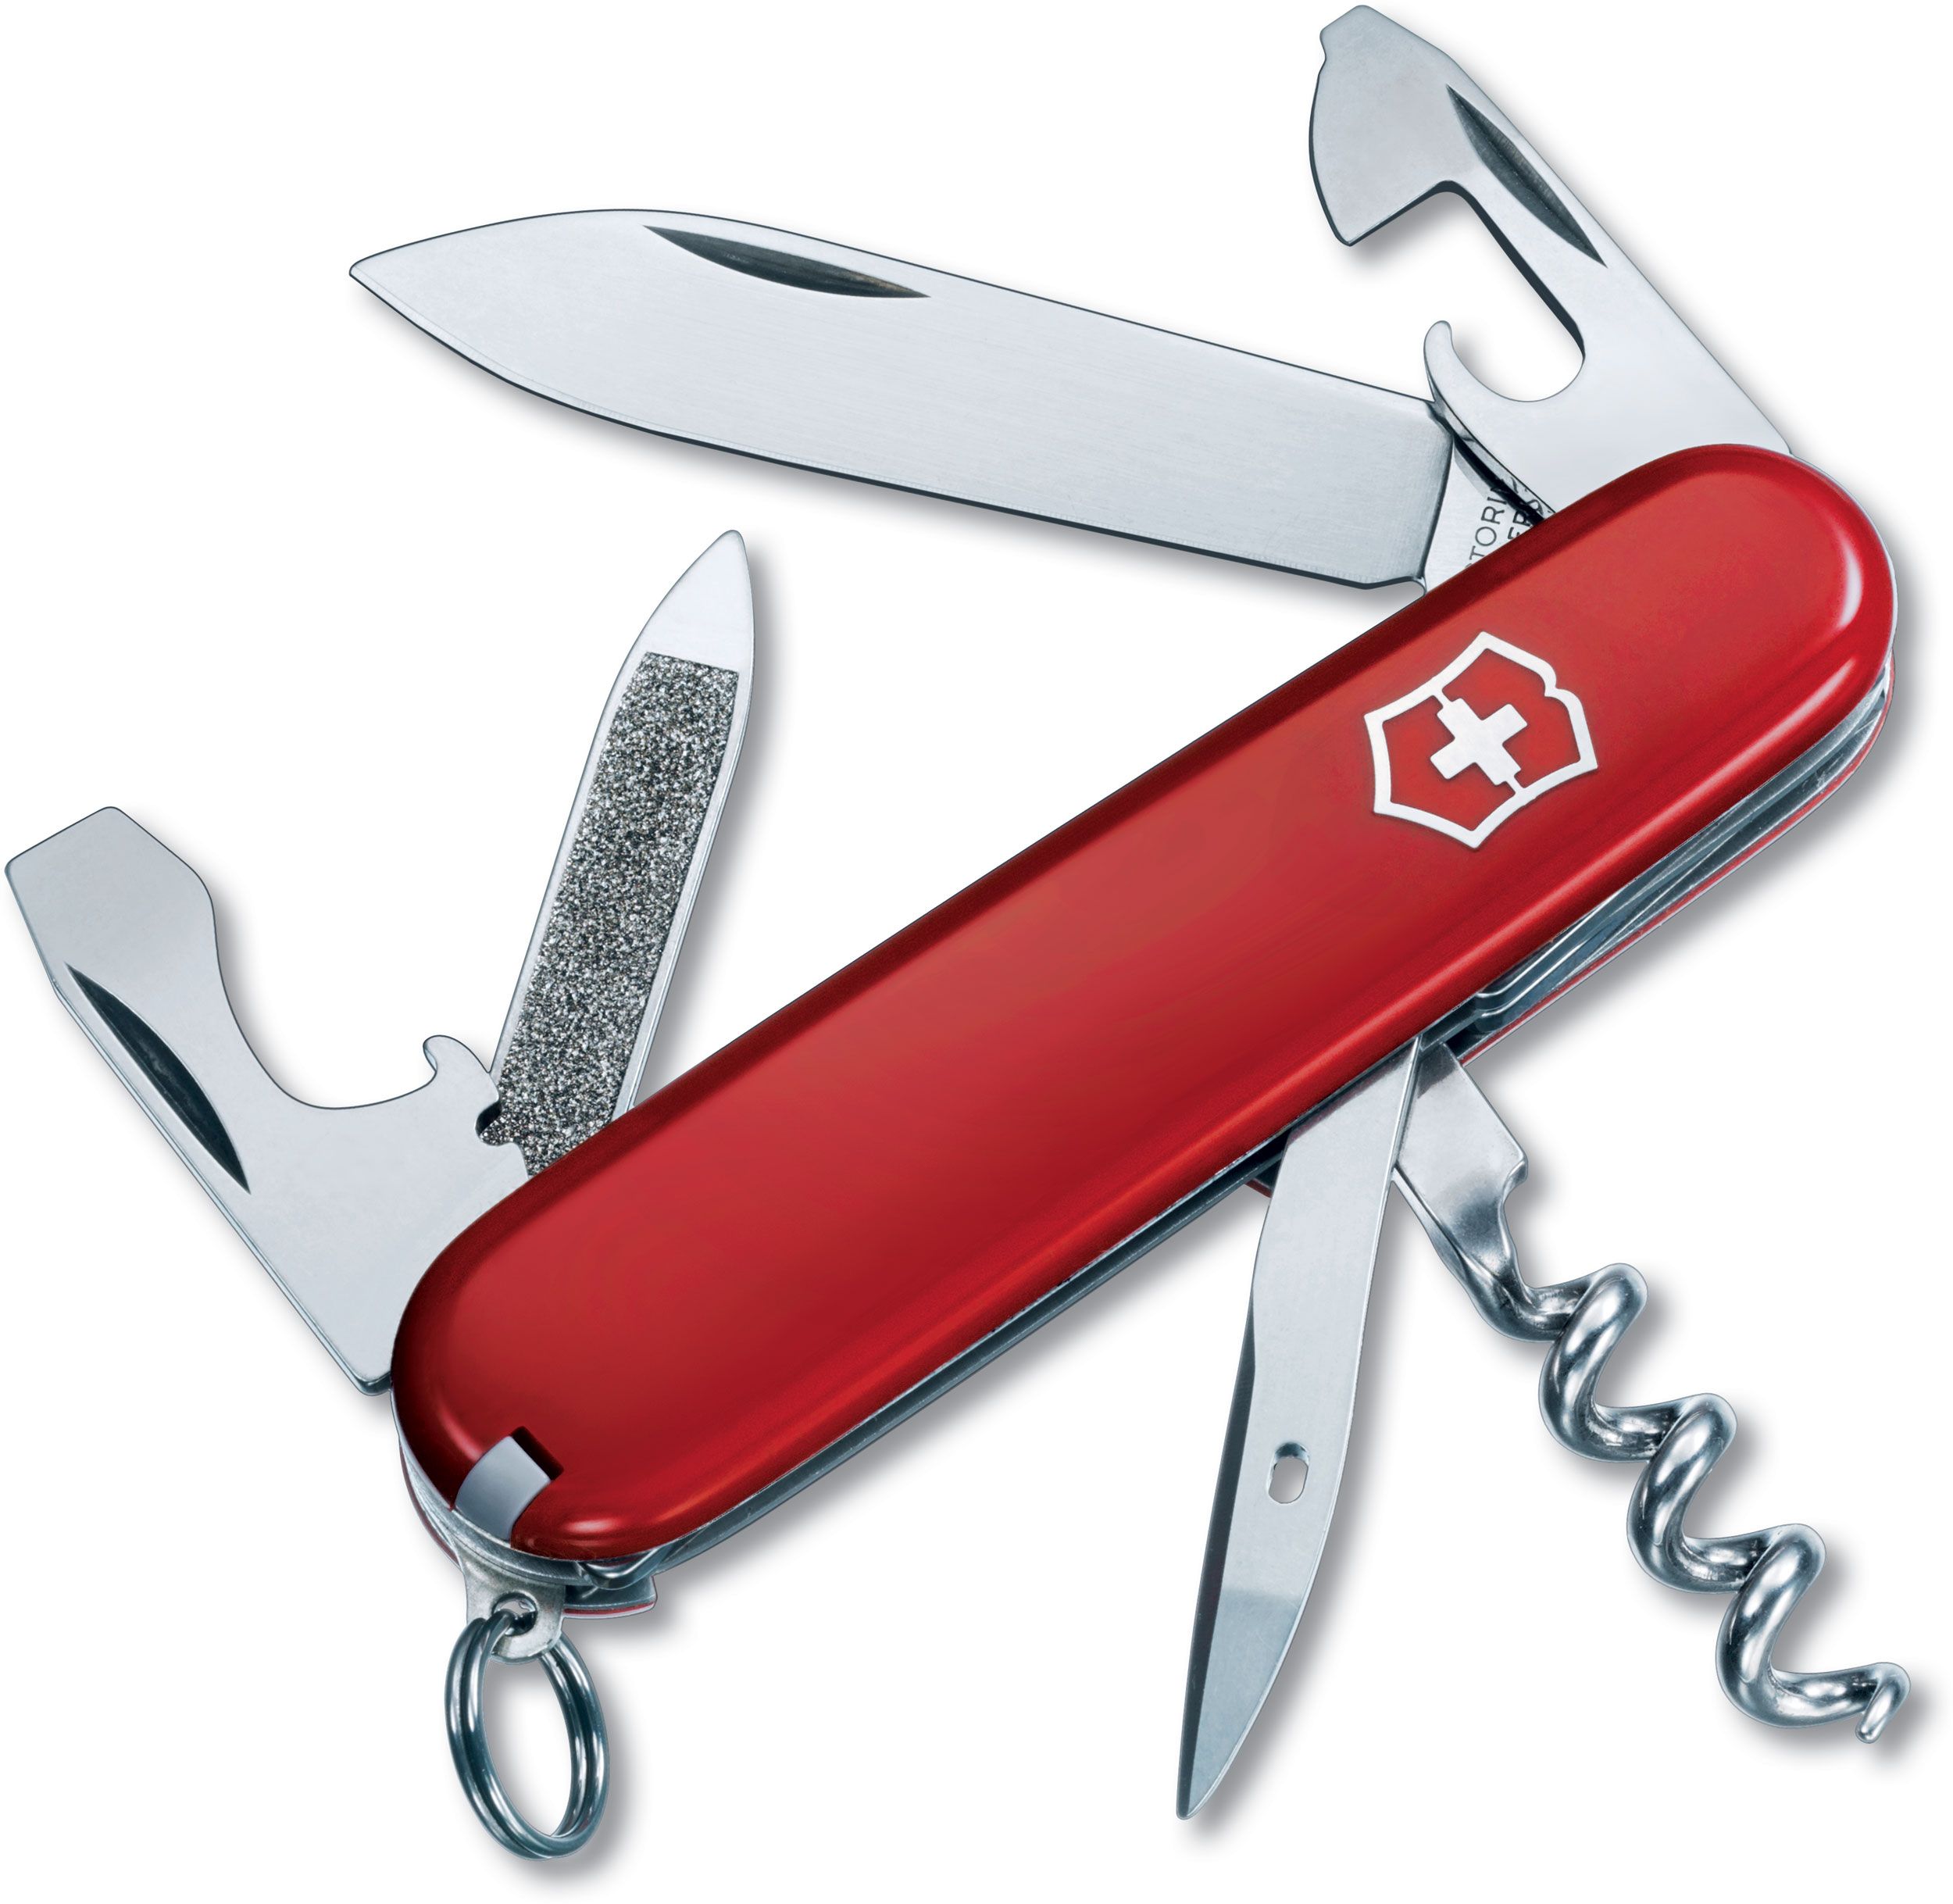 536. Compact – VSAKCS 2009 – LeaF's Victorinox knives collection